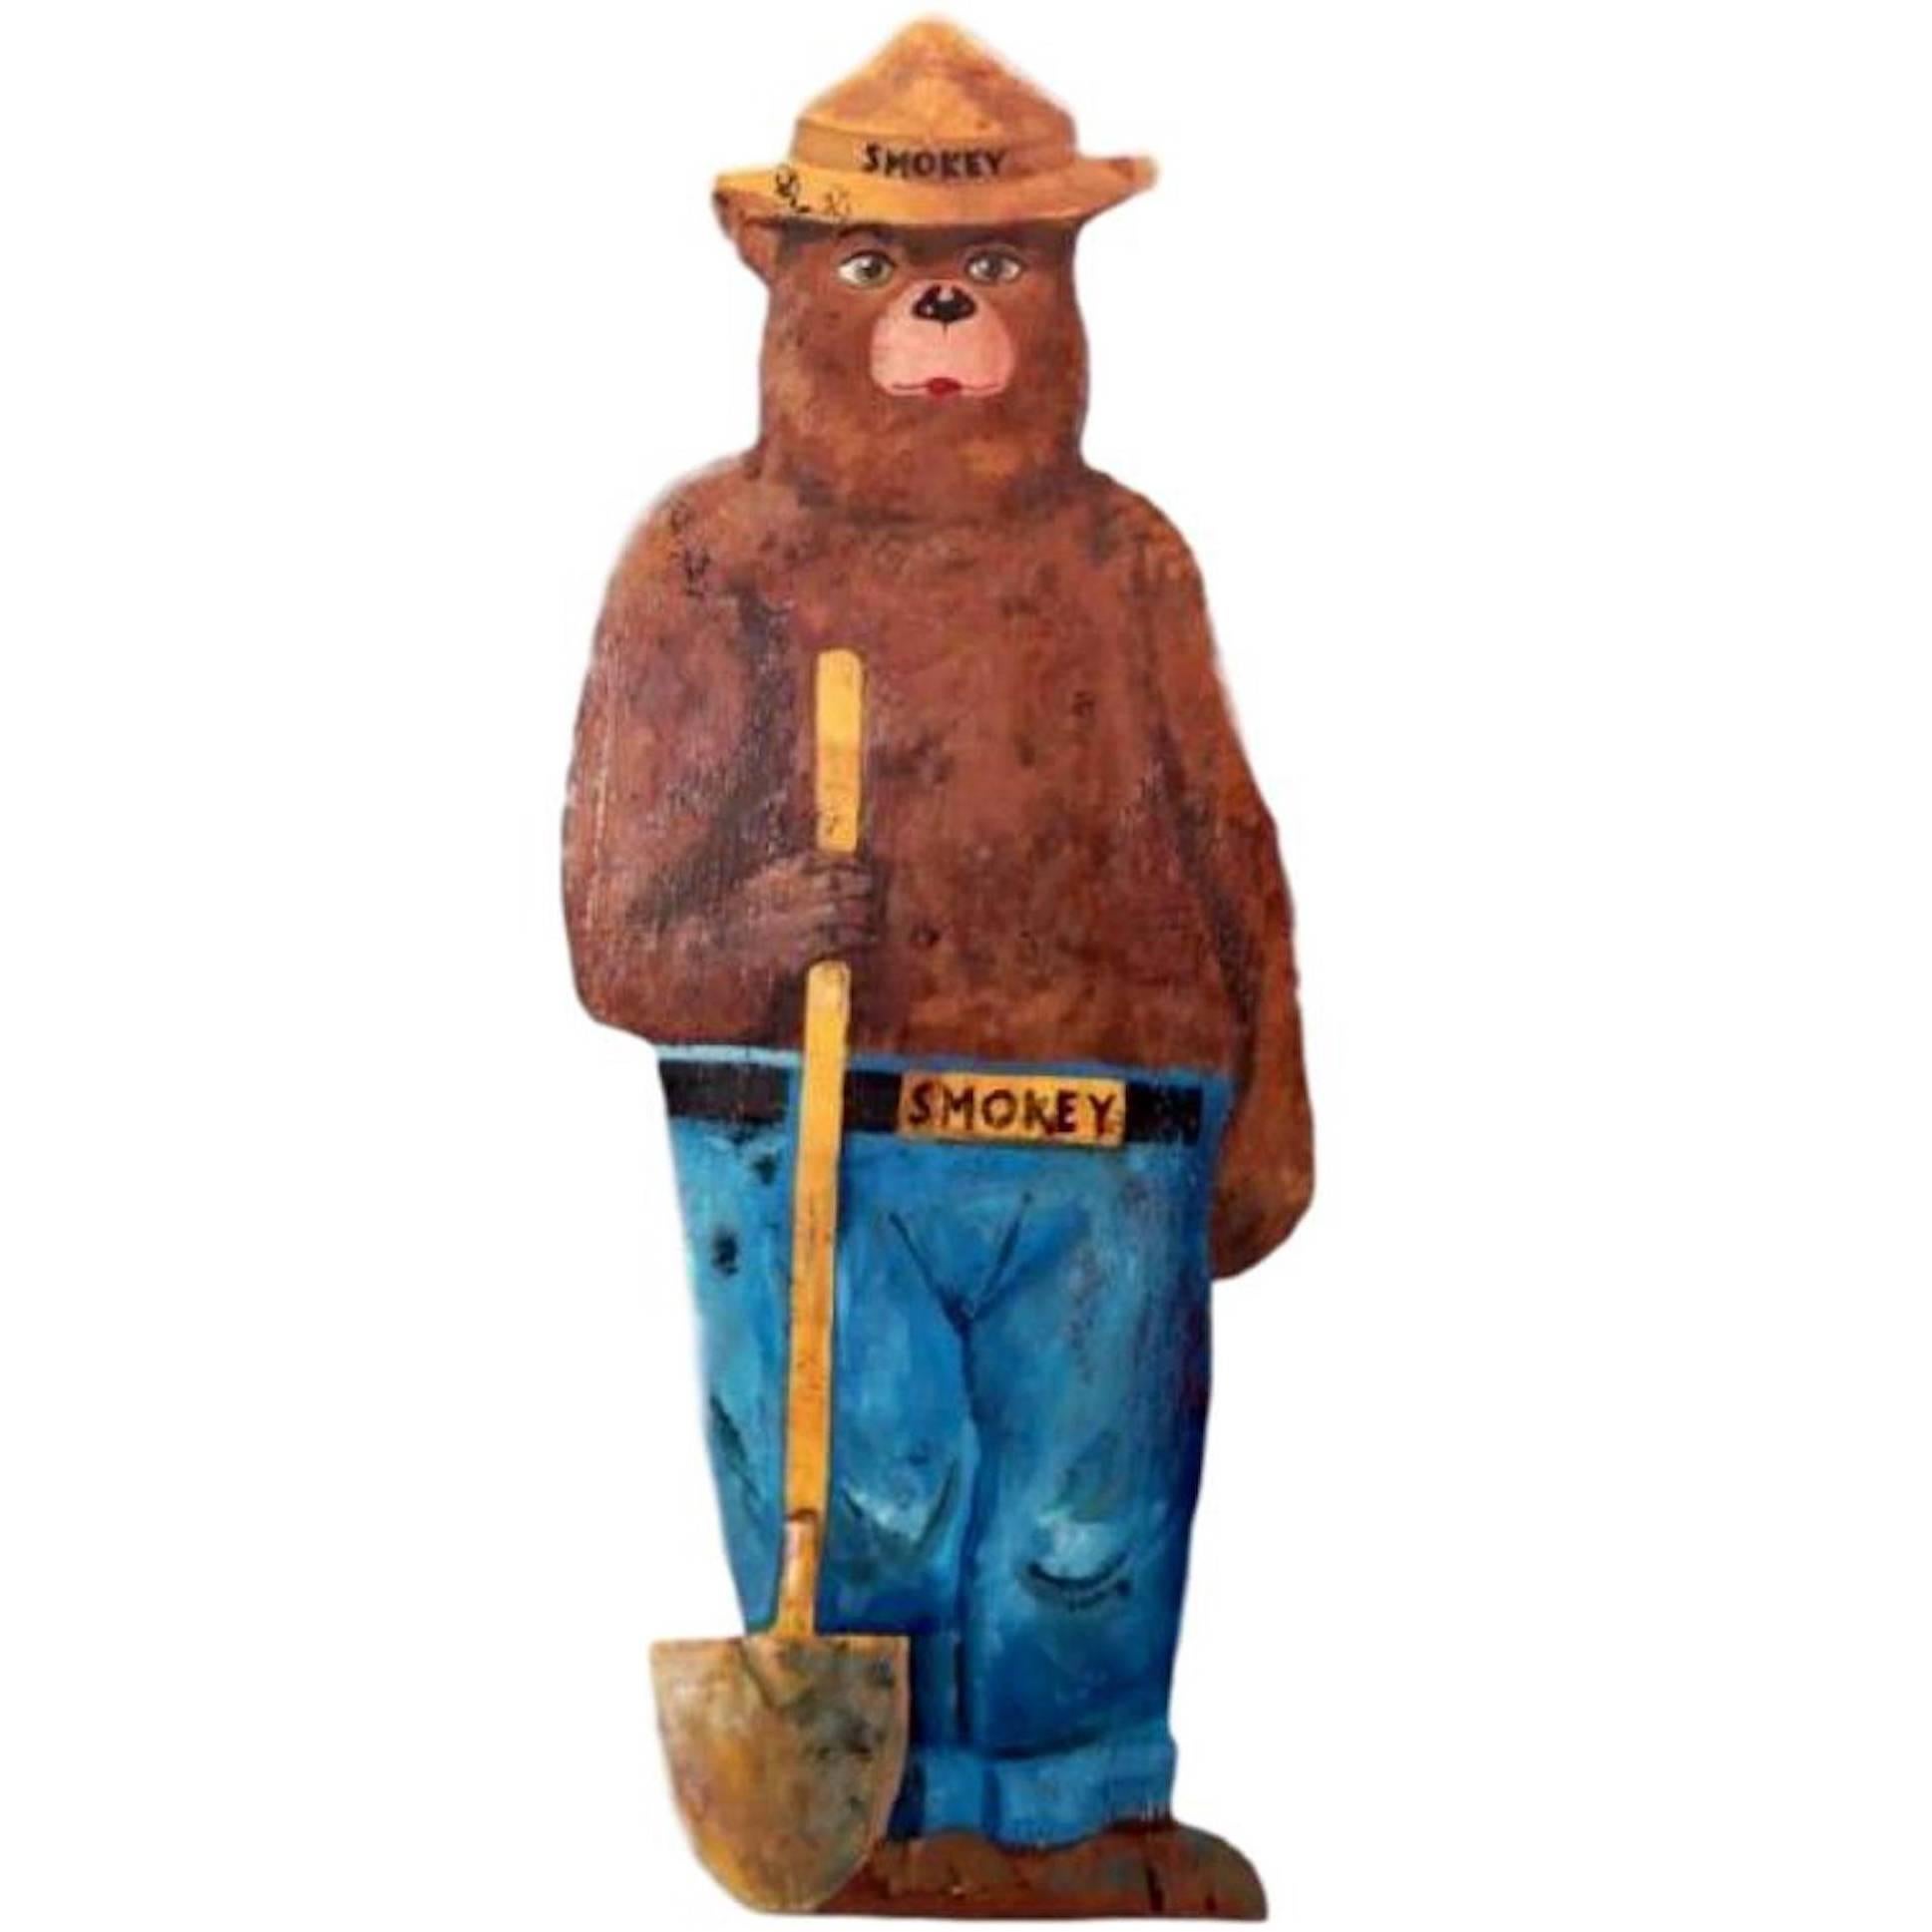 Hand-Painted Wooden Life-Sized Smokey the Bear